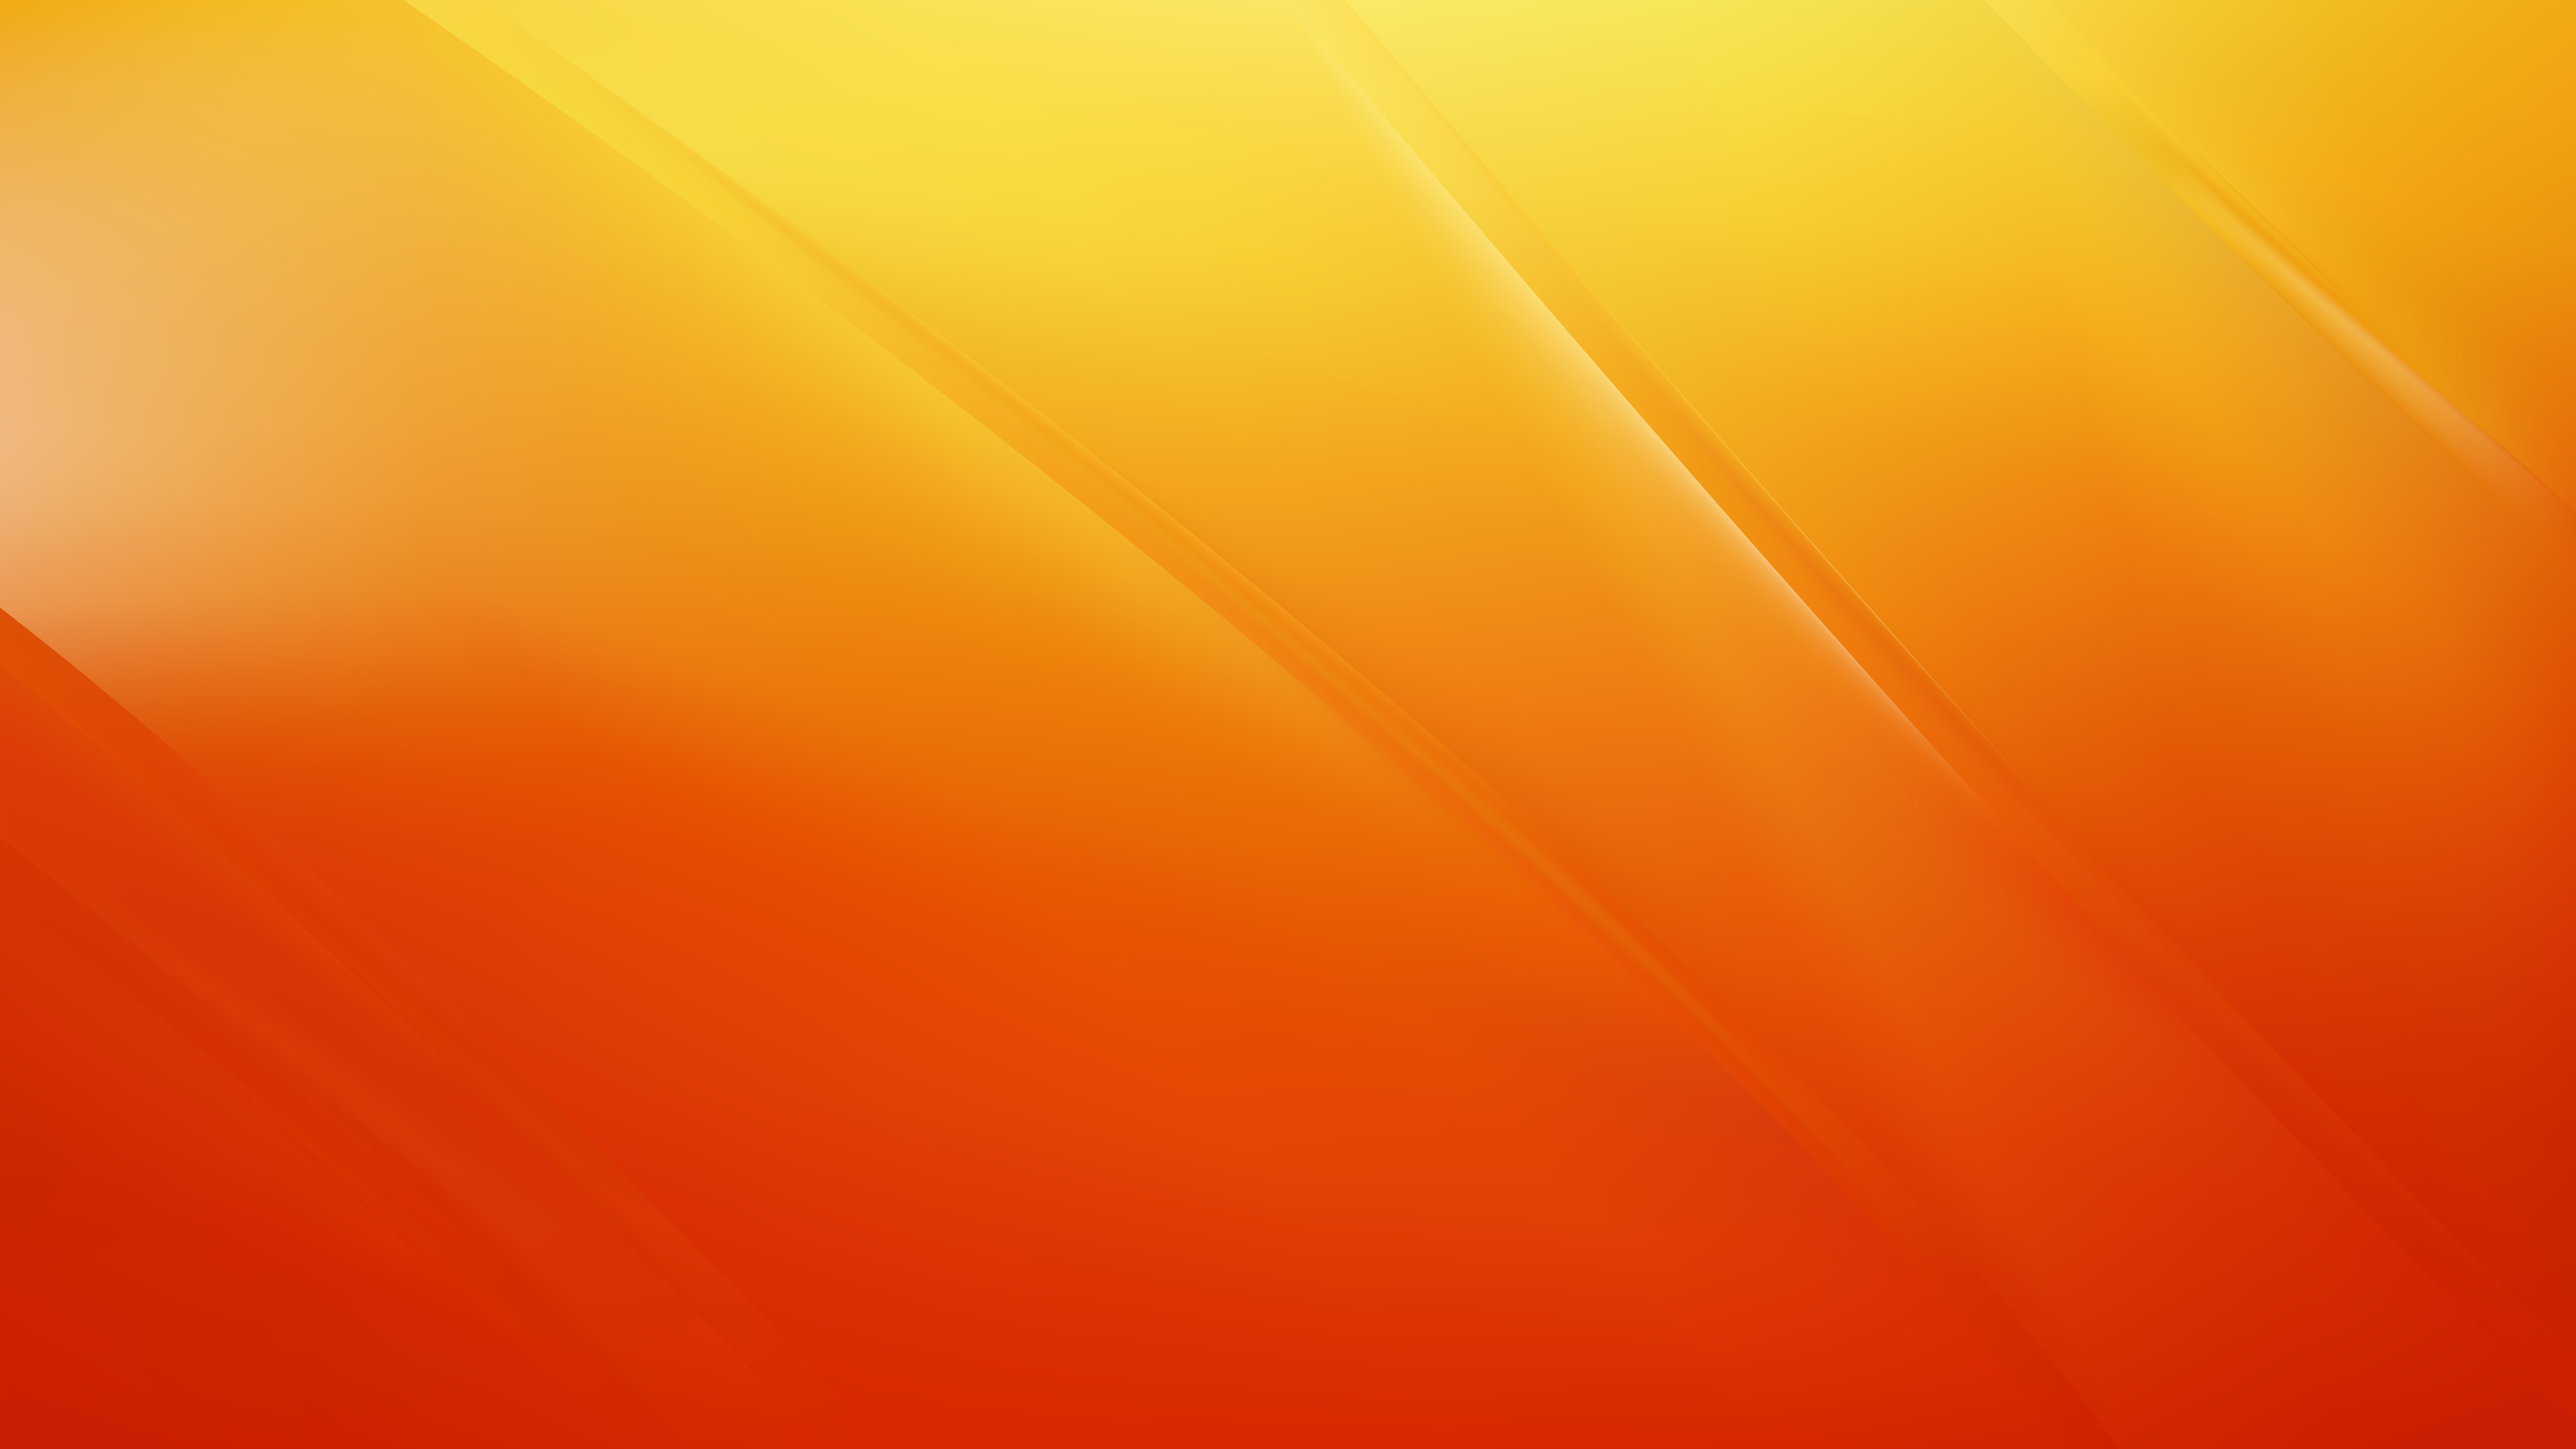 Free Abstract Red and Orange Diagonal Shiny Lines Background